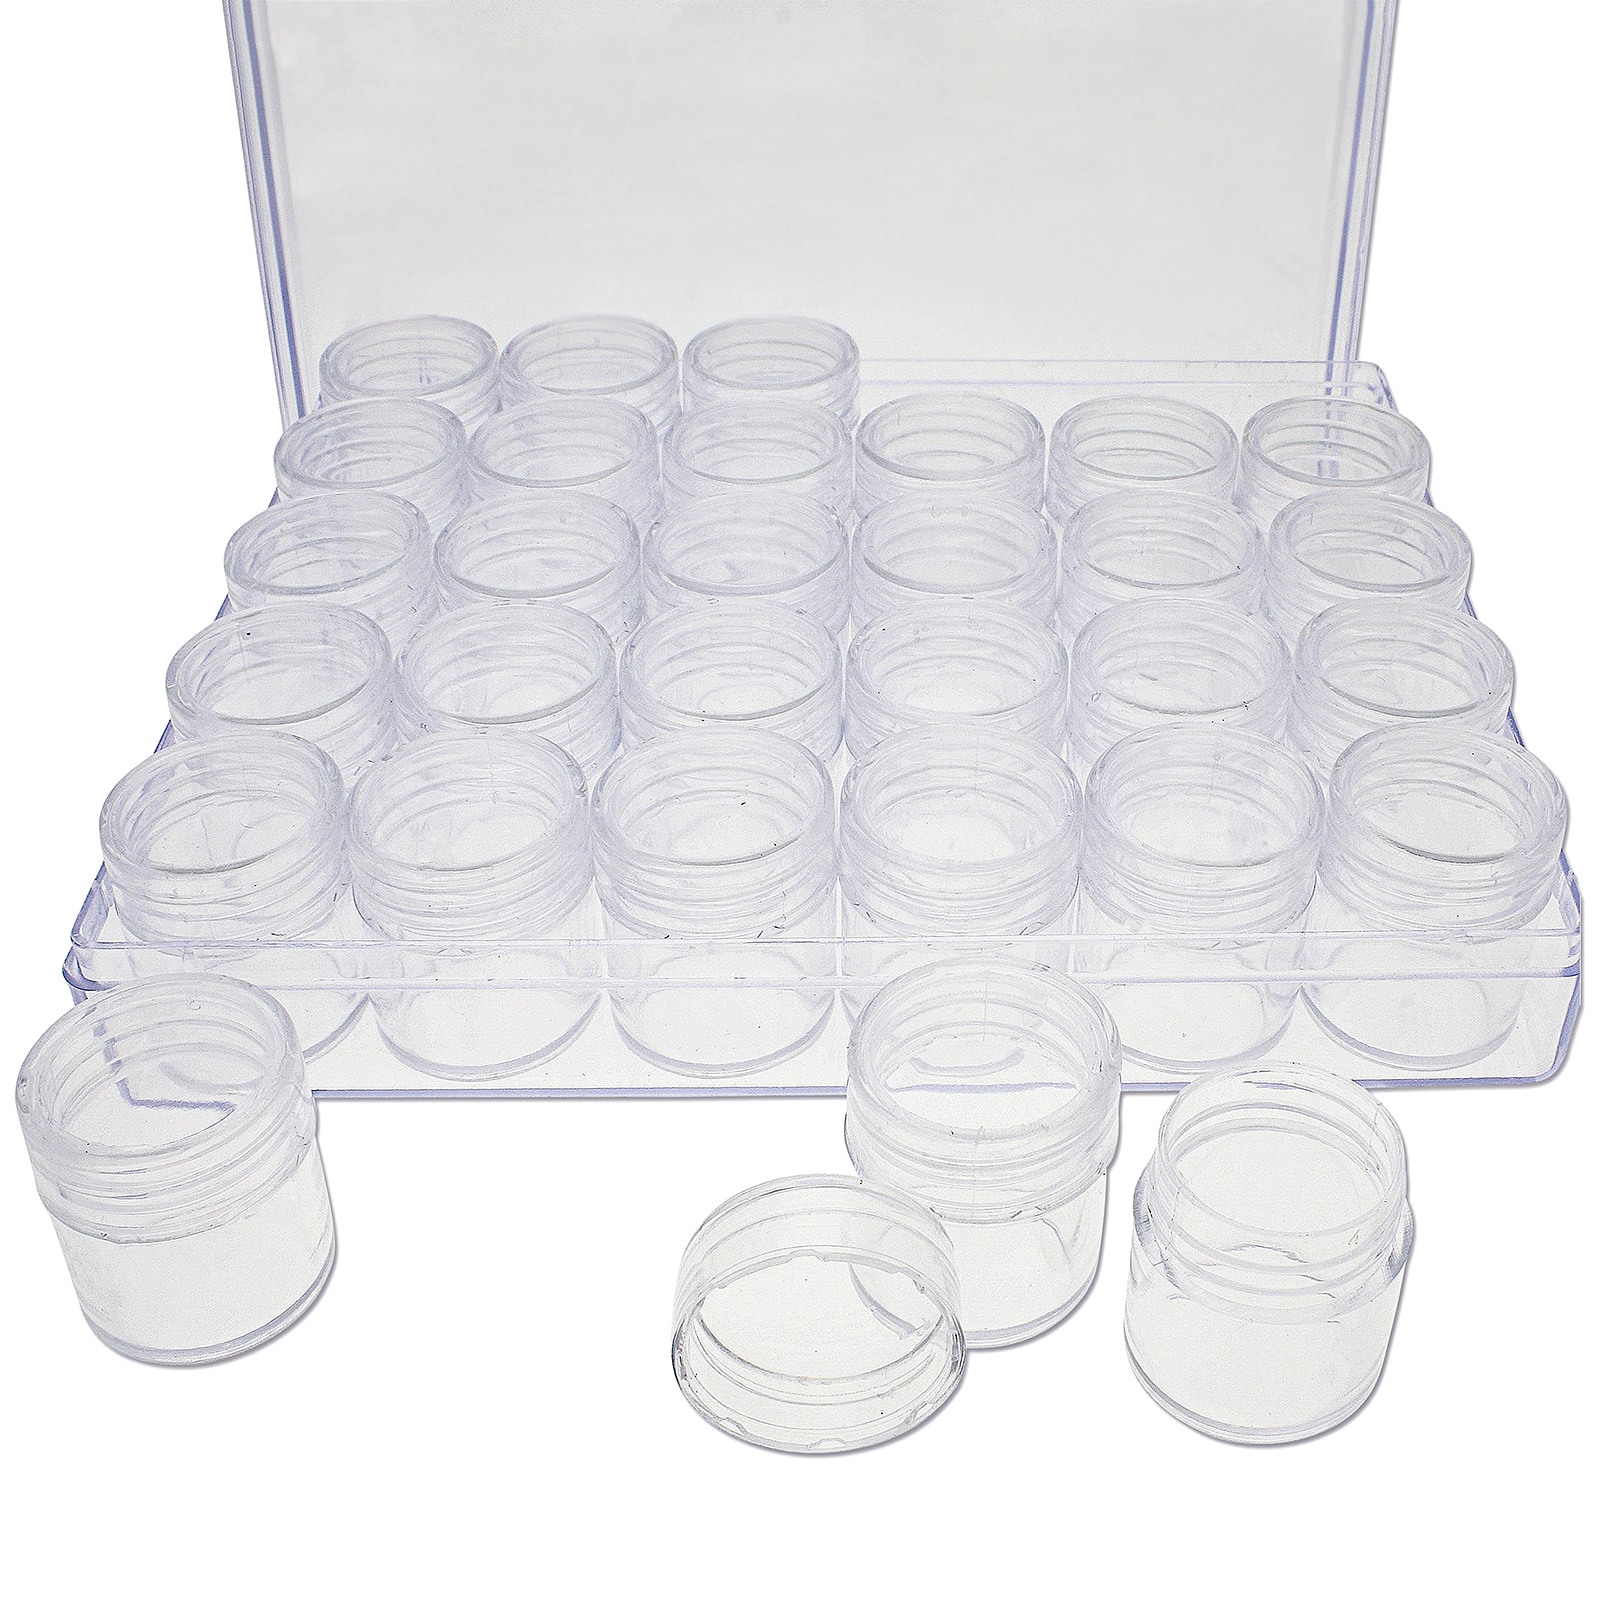 Juvale Clear Round Plastic Jars with Label Stickers (8 oz, 10 Pack